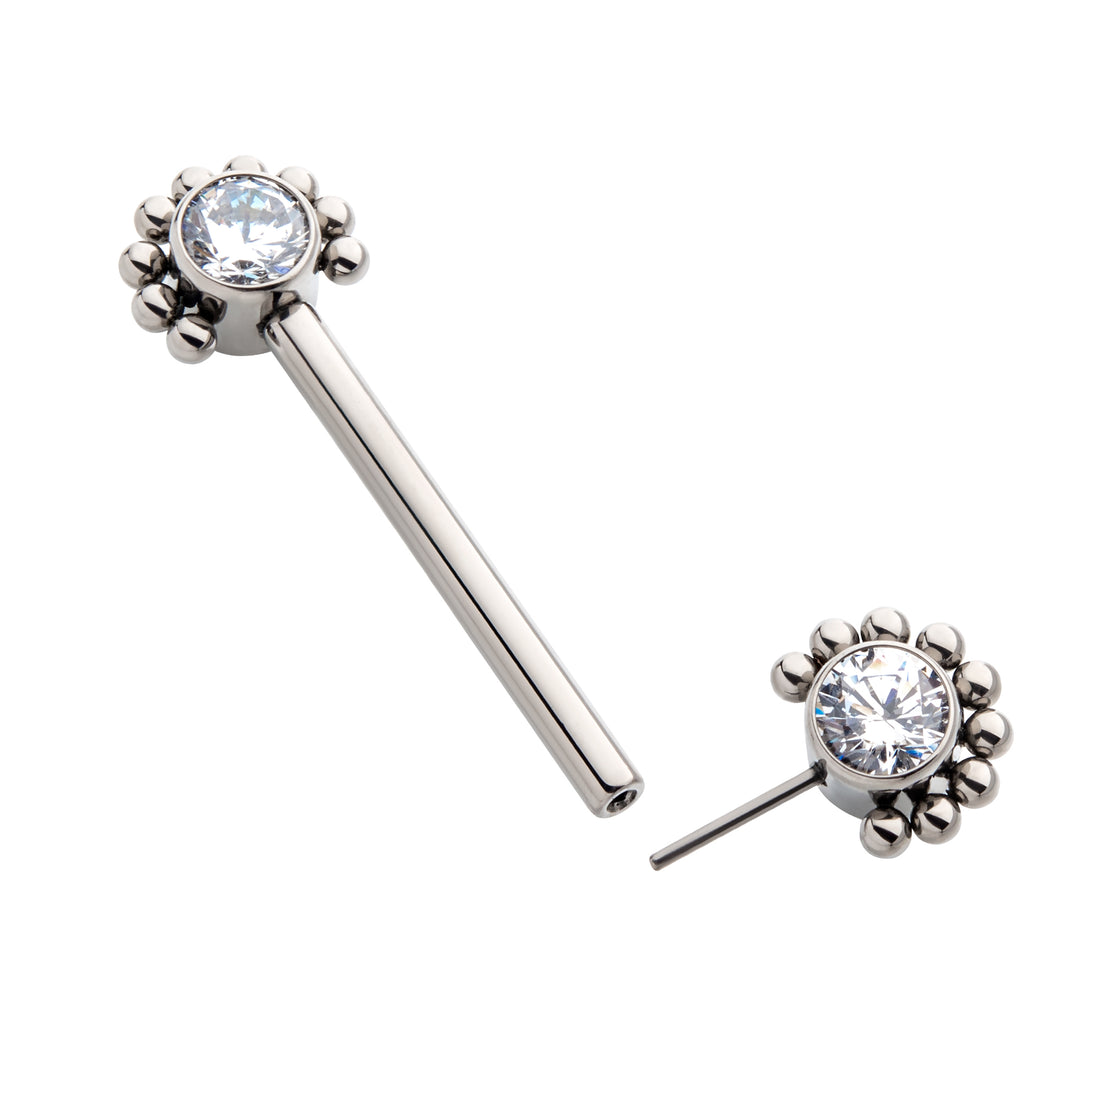 Titanium with One Side Fixed & One Side Threadless Nipple Barbell with Clustered Beads &  Bezel Set CZ Ends